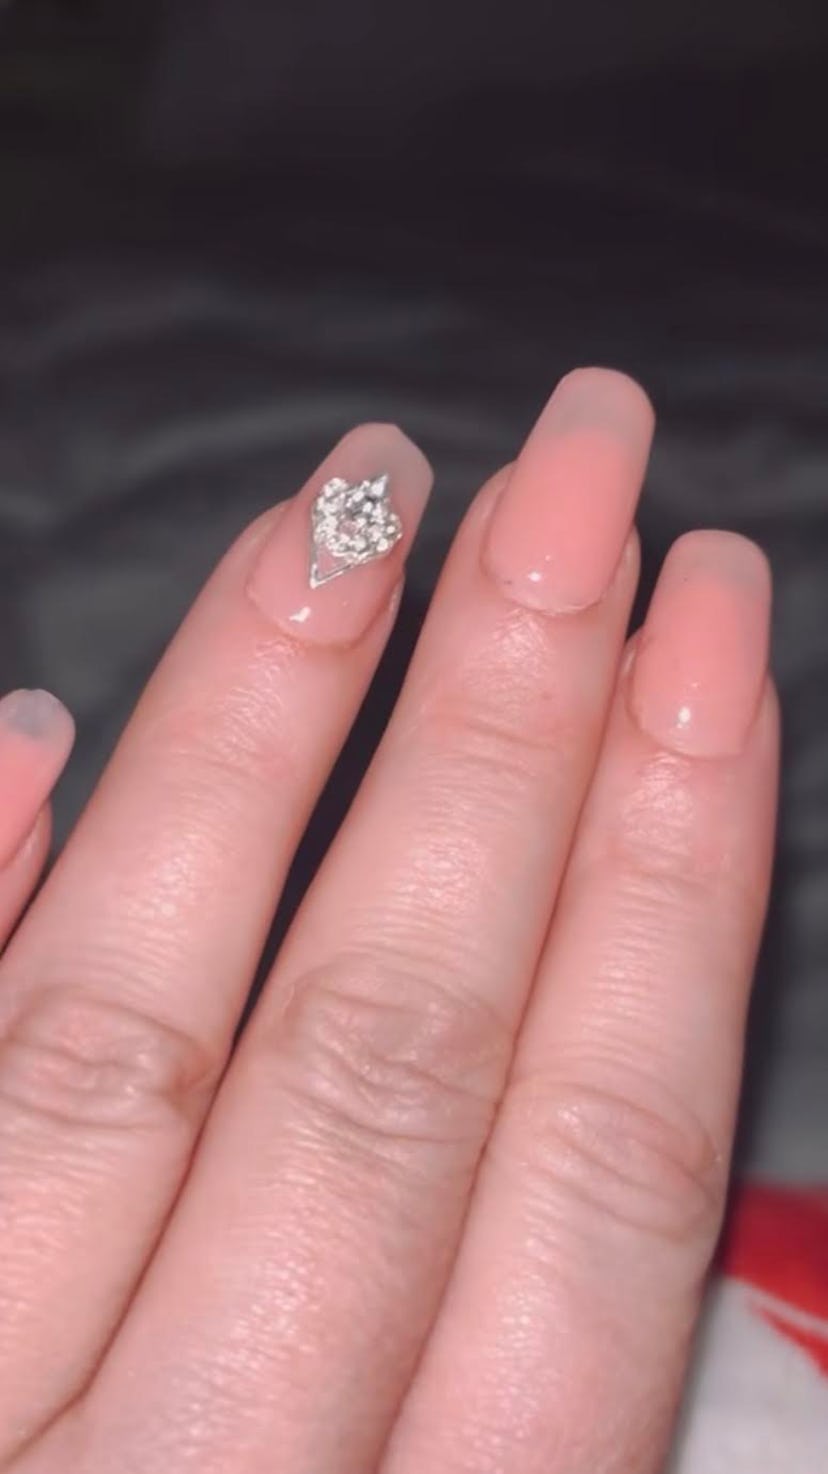 Britney Spears rocked a "lip gloss" manicure with 3D silver rhinestones.